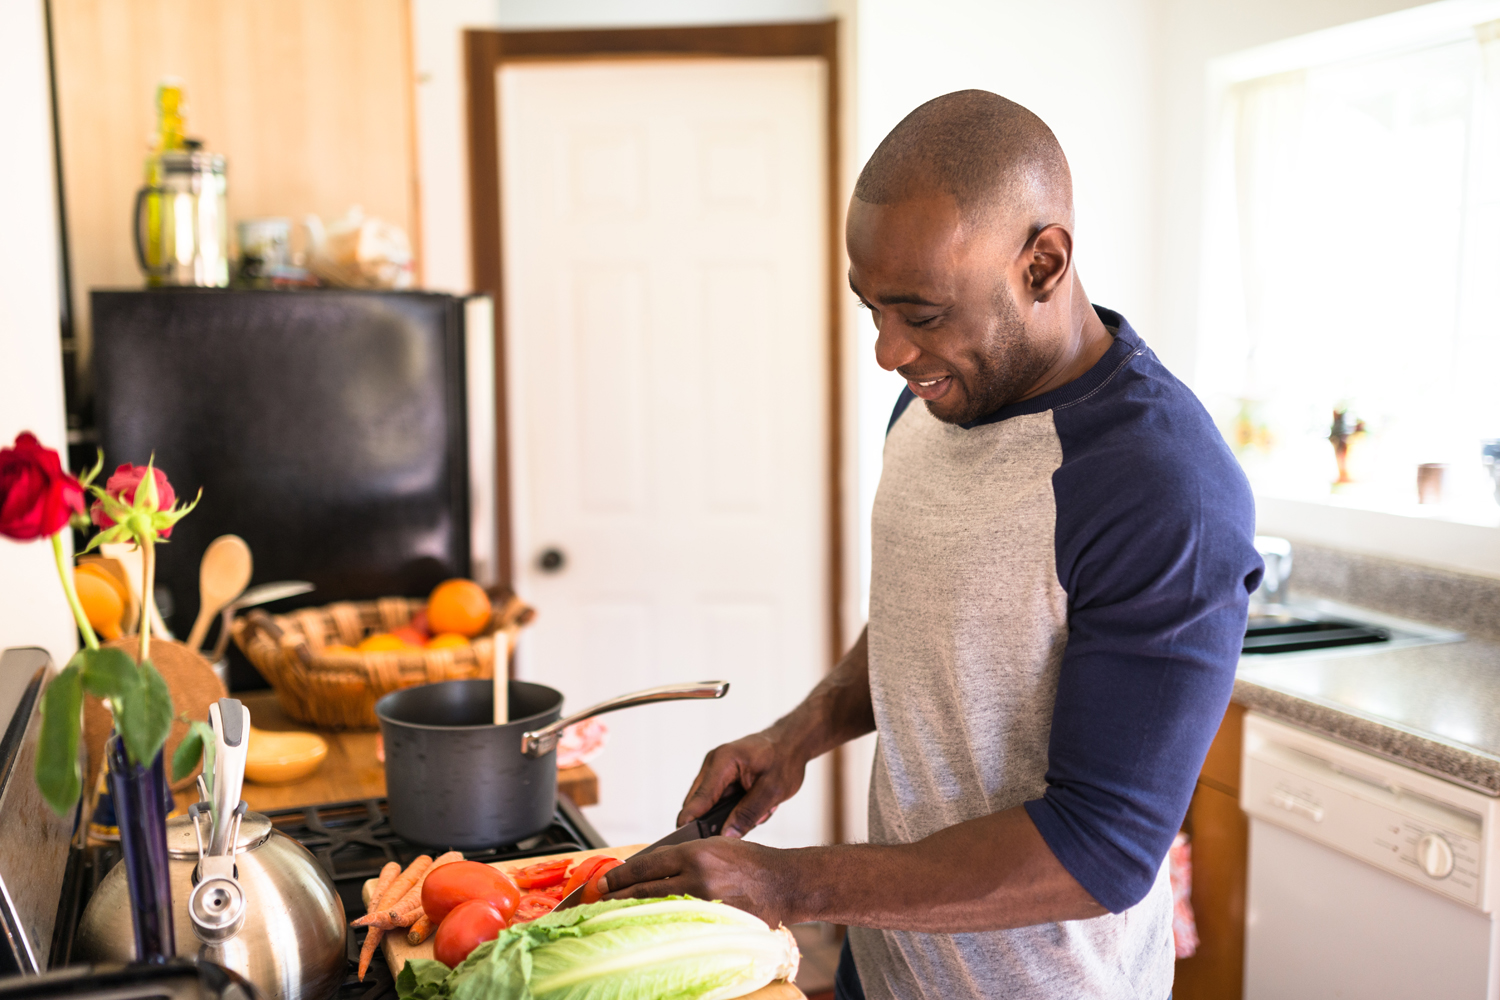 A man preparing his next healthy meal with a smile.